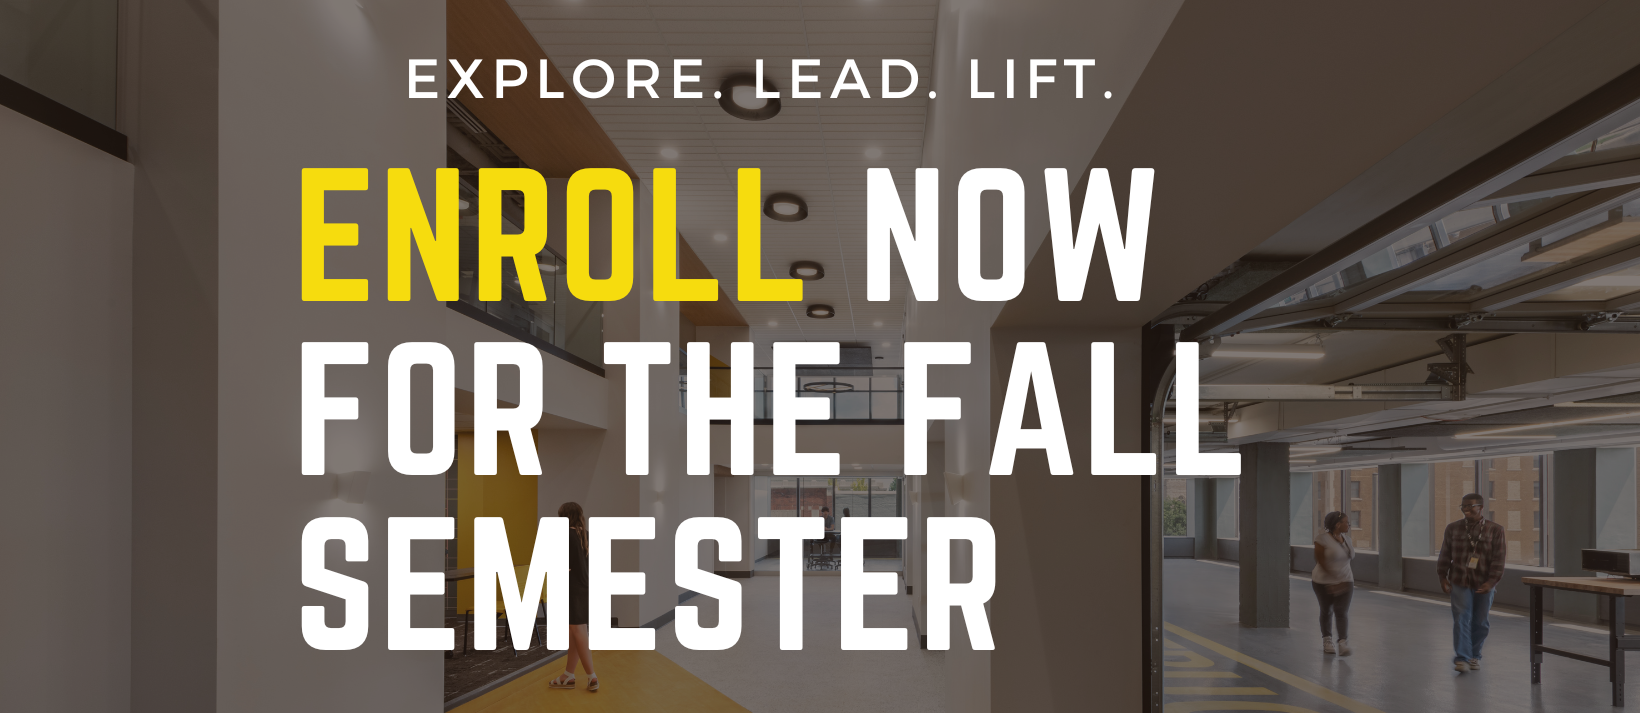 explore lead lift. Enroll now for the fall semester